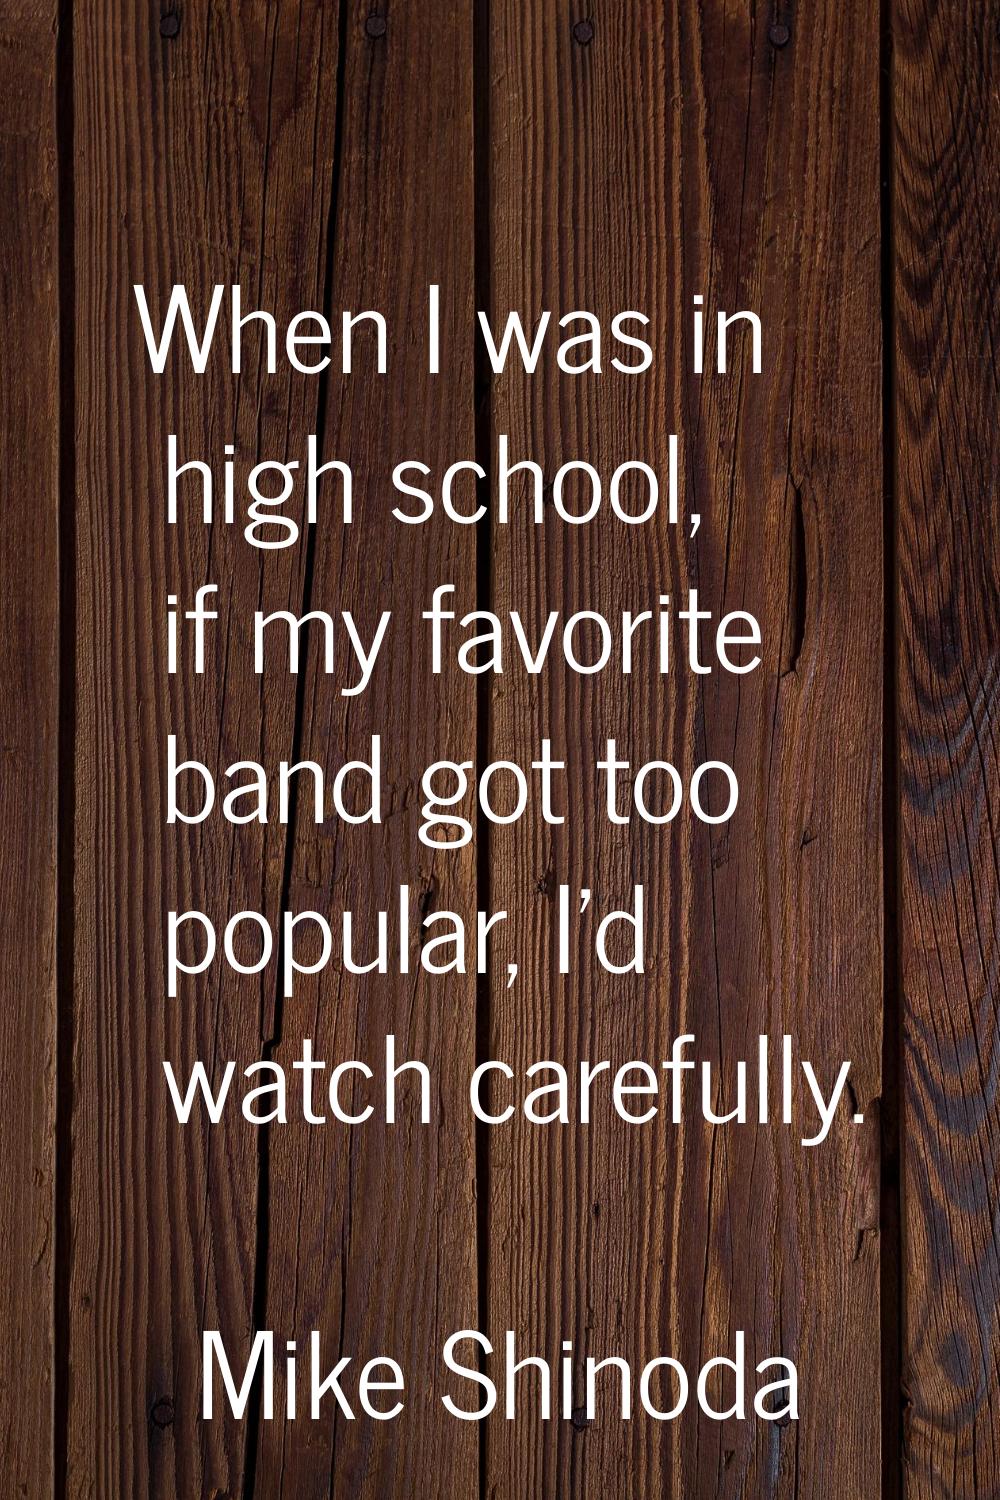 When I was in high school, if my favorite band got too popular, I'd watch carefully.